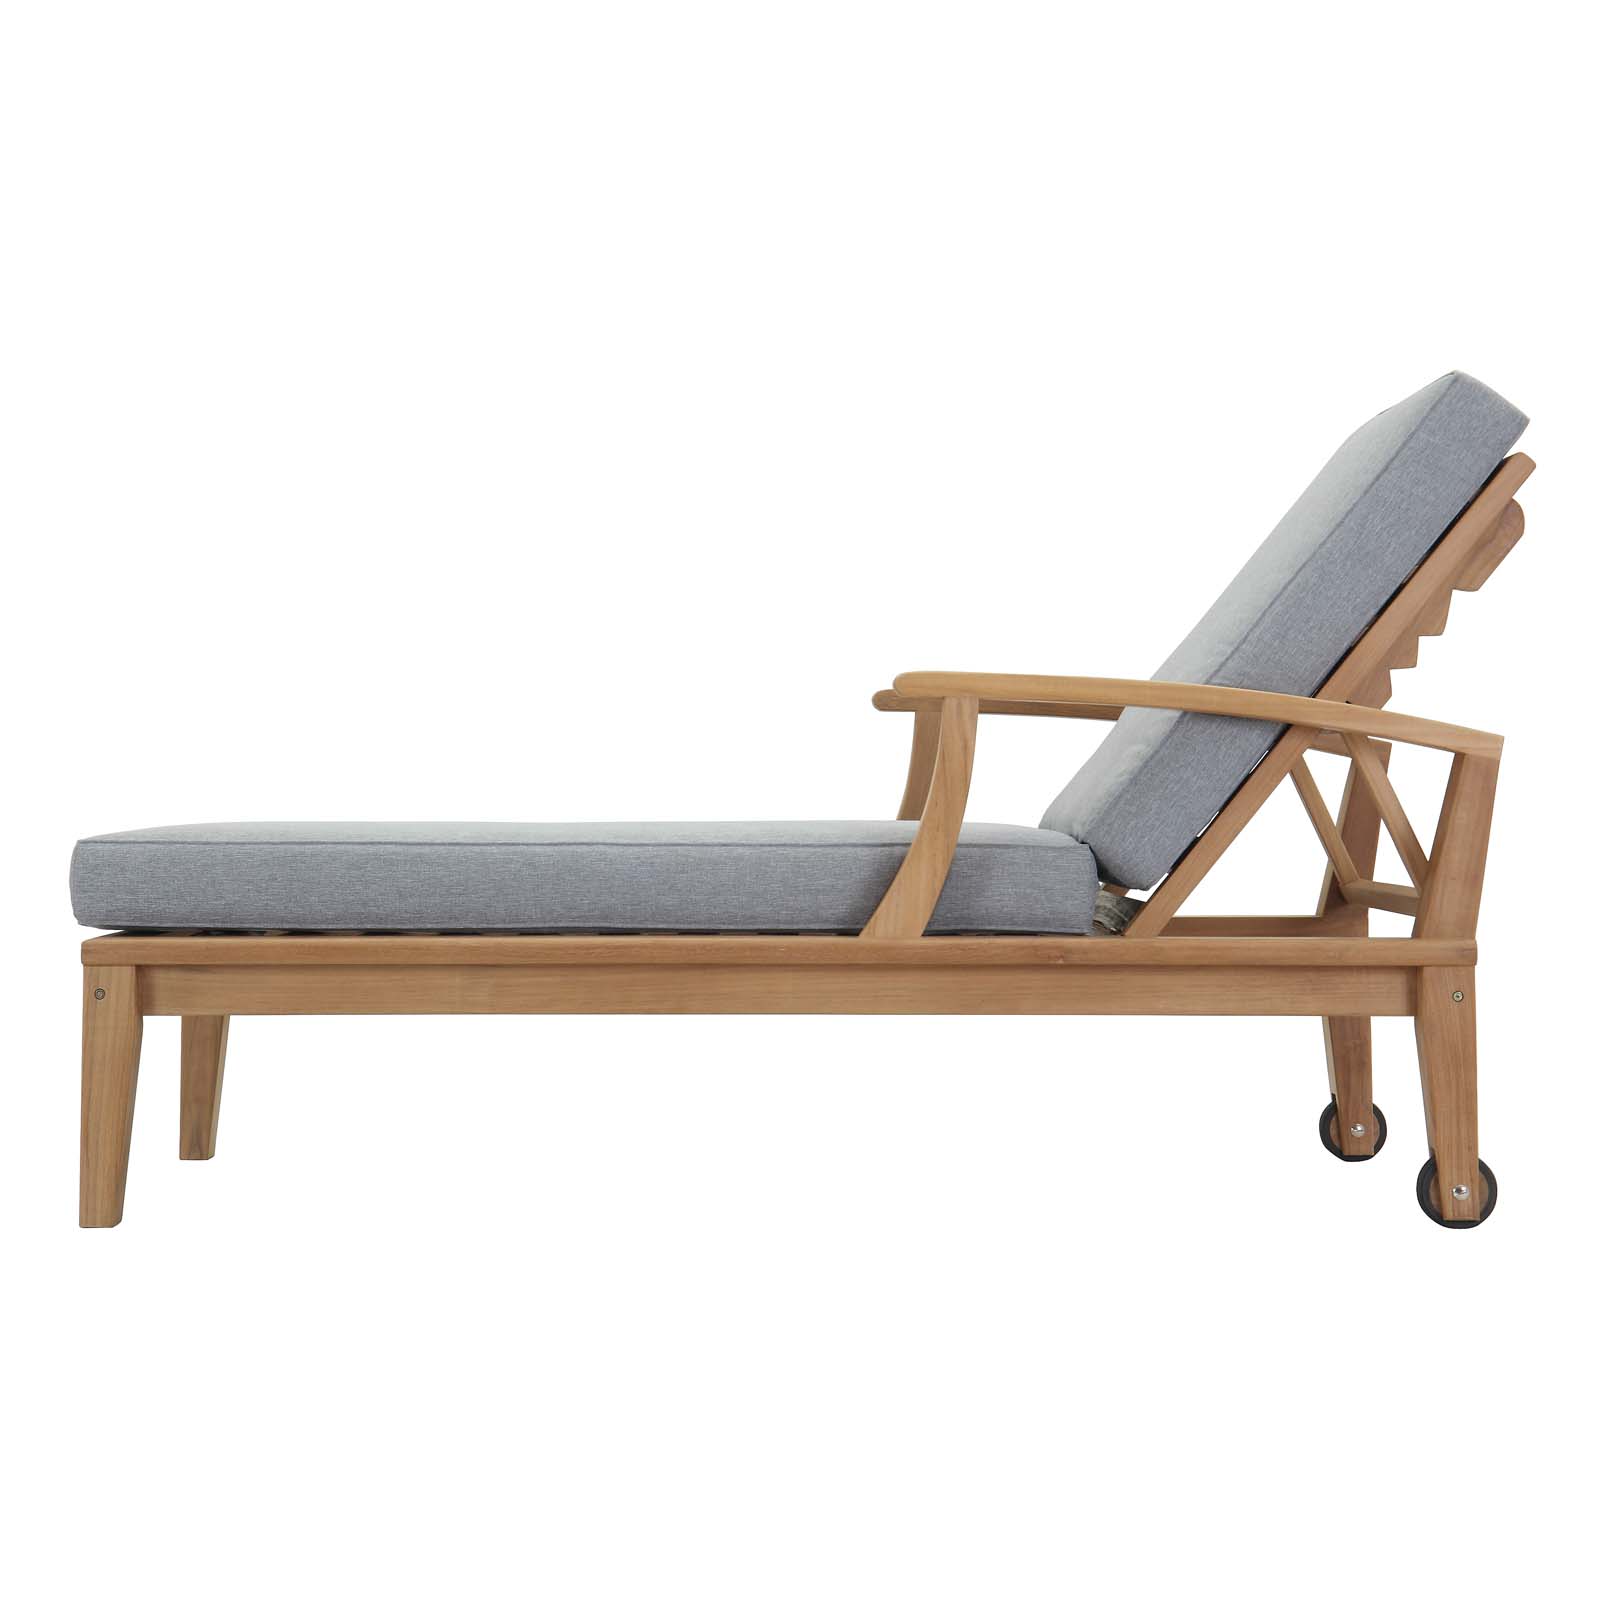 Modern Contemporary Urban Design Outdoor Patio Balcony Garden Furniture Lounge Chair Chaise, Wood, Grey Gray Natural - image 3 of 8